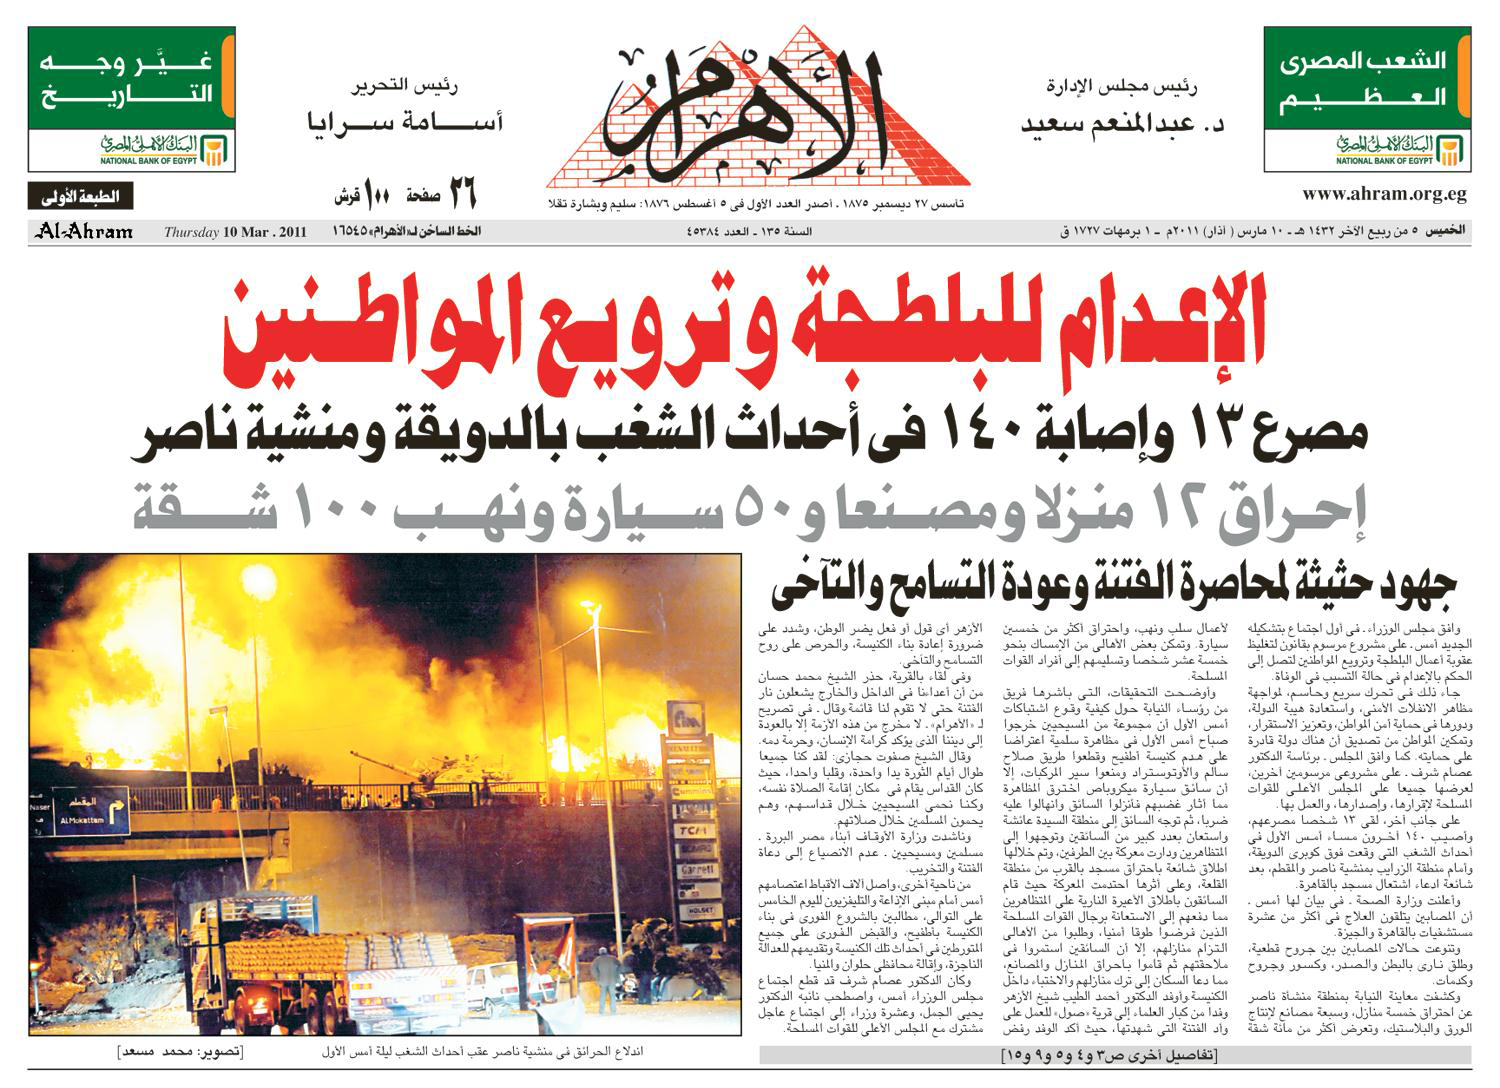 Violent streets of Egypt as reported on the front page of the Egyptian daily Al-Ahram, March 10, 2011.